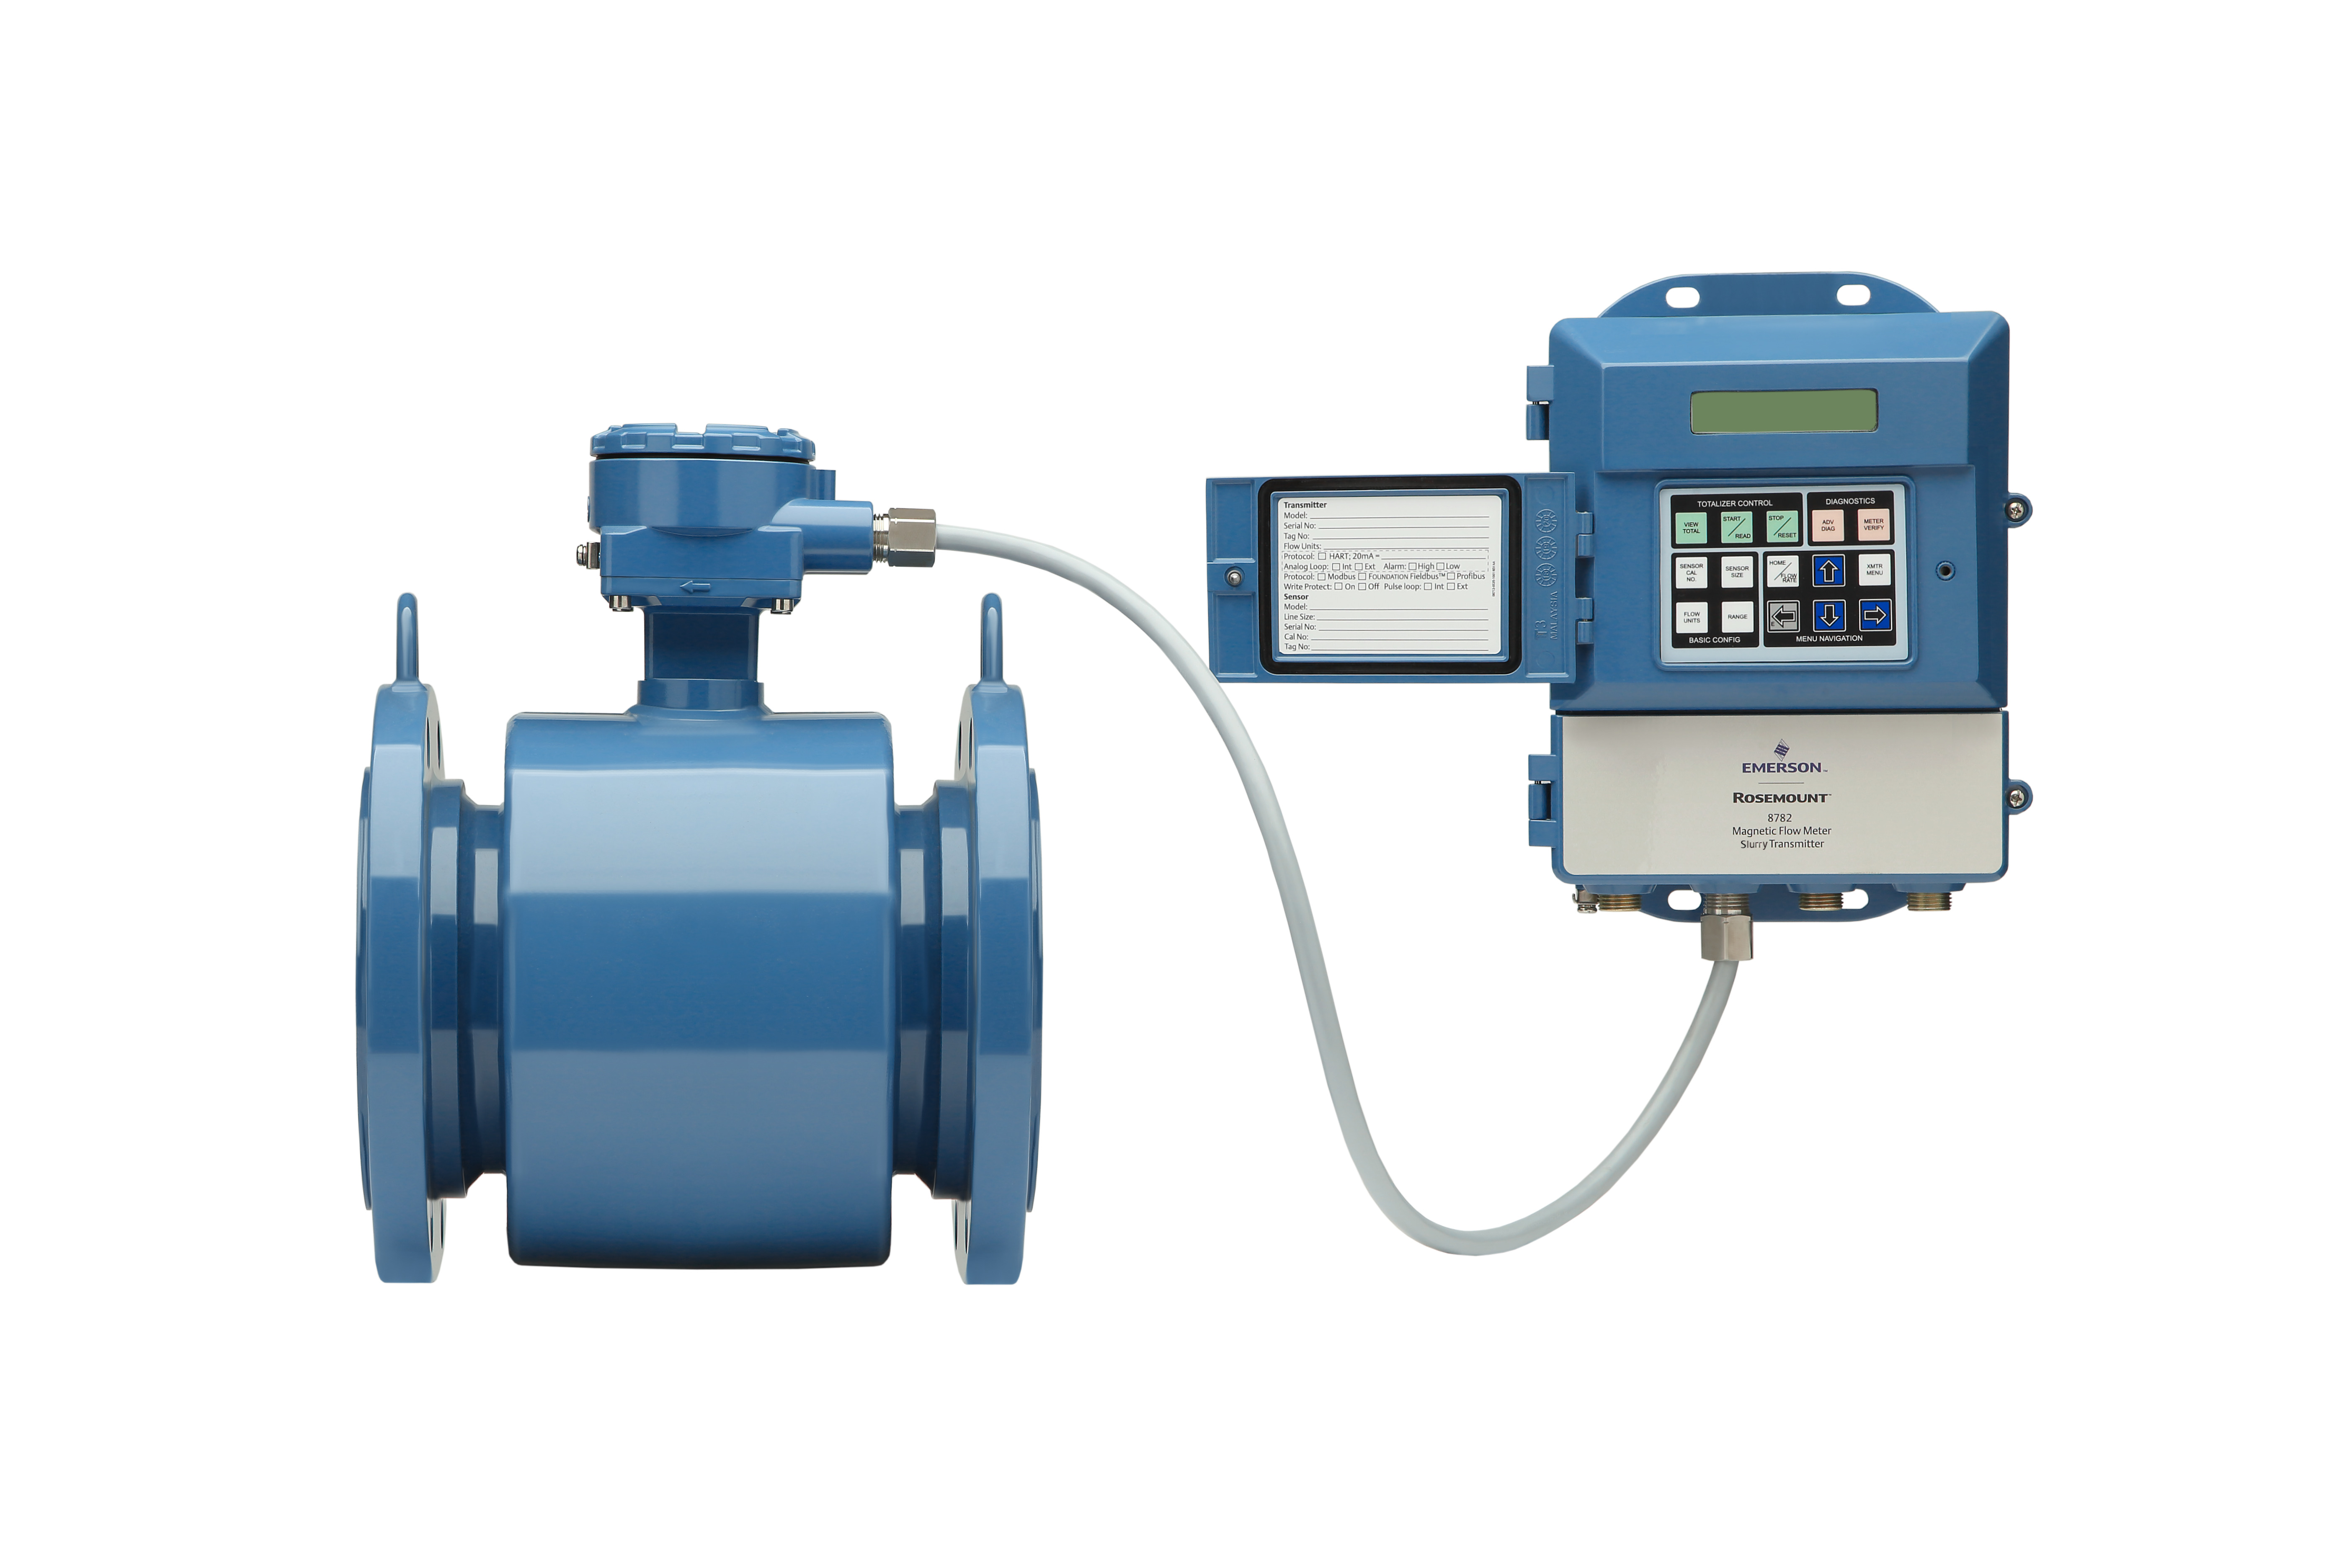 Emerson cuts through the noise with new Slurry Magnetic Flow Meter